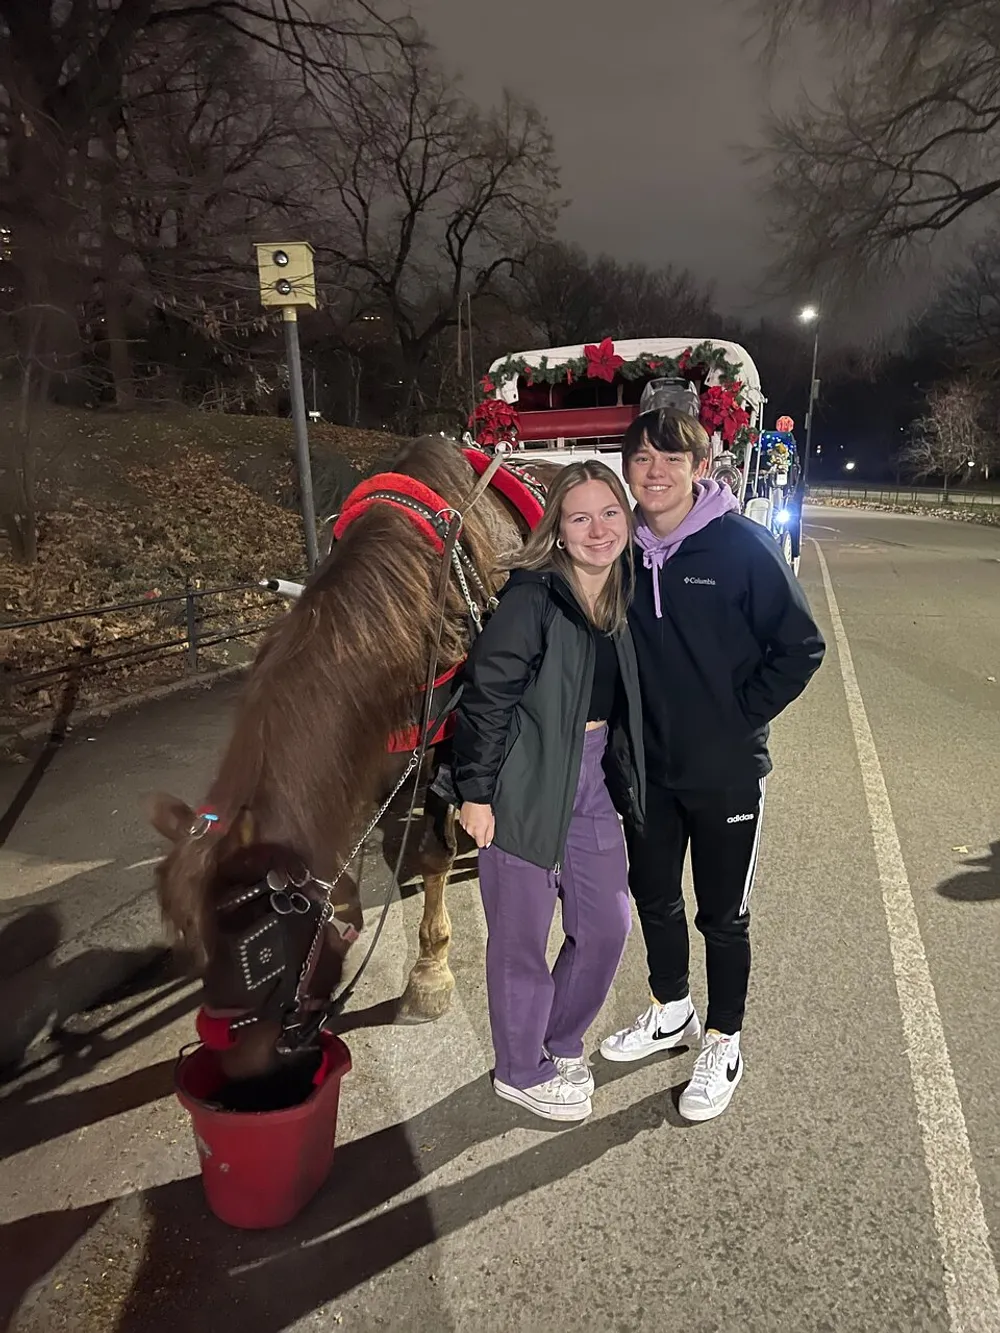 Two people are posing for a photo with a horse-drawn carriage decorated with Christmas adornments in the background during nighttime